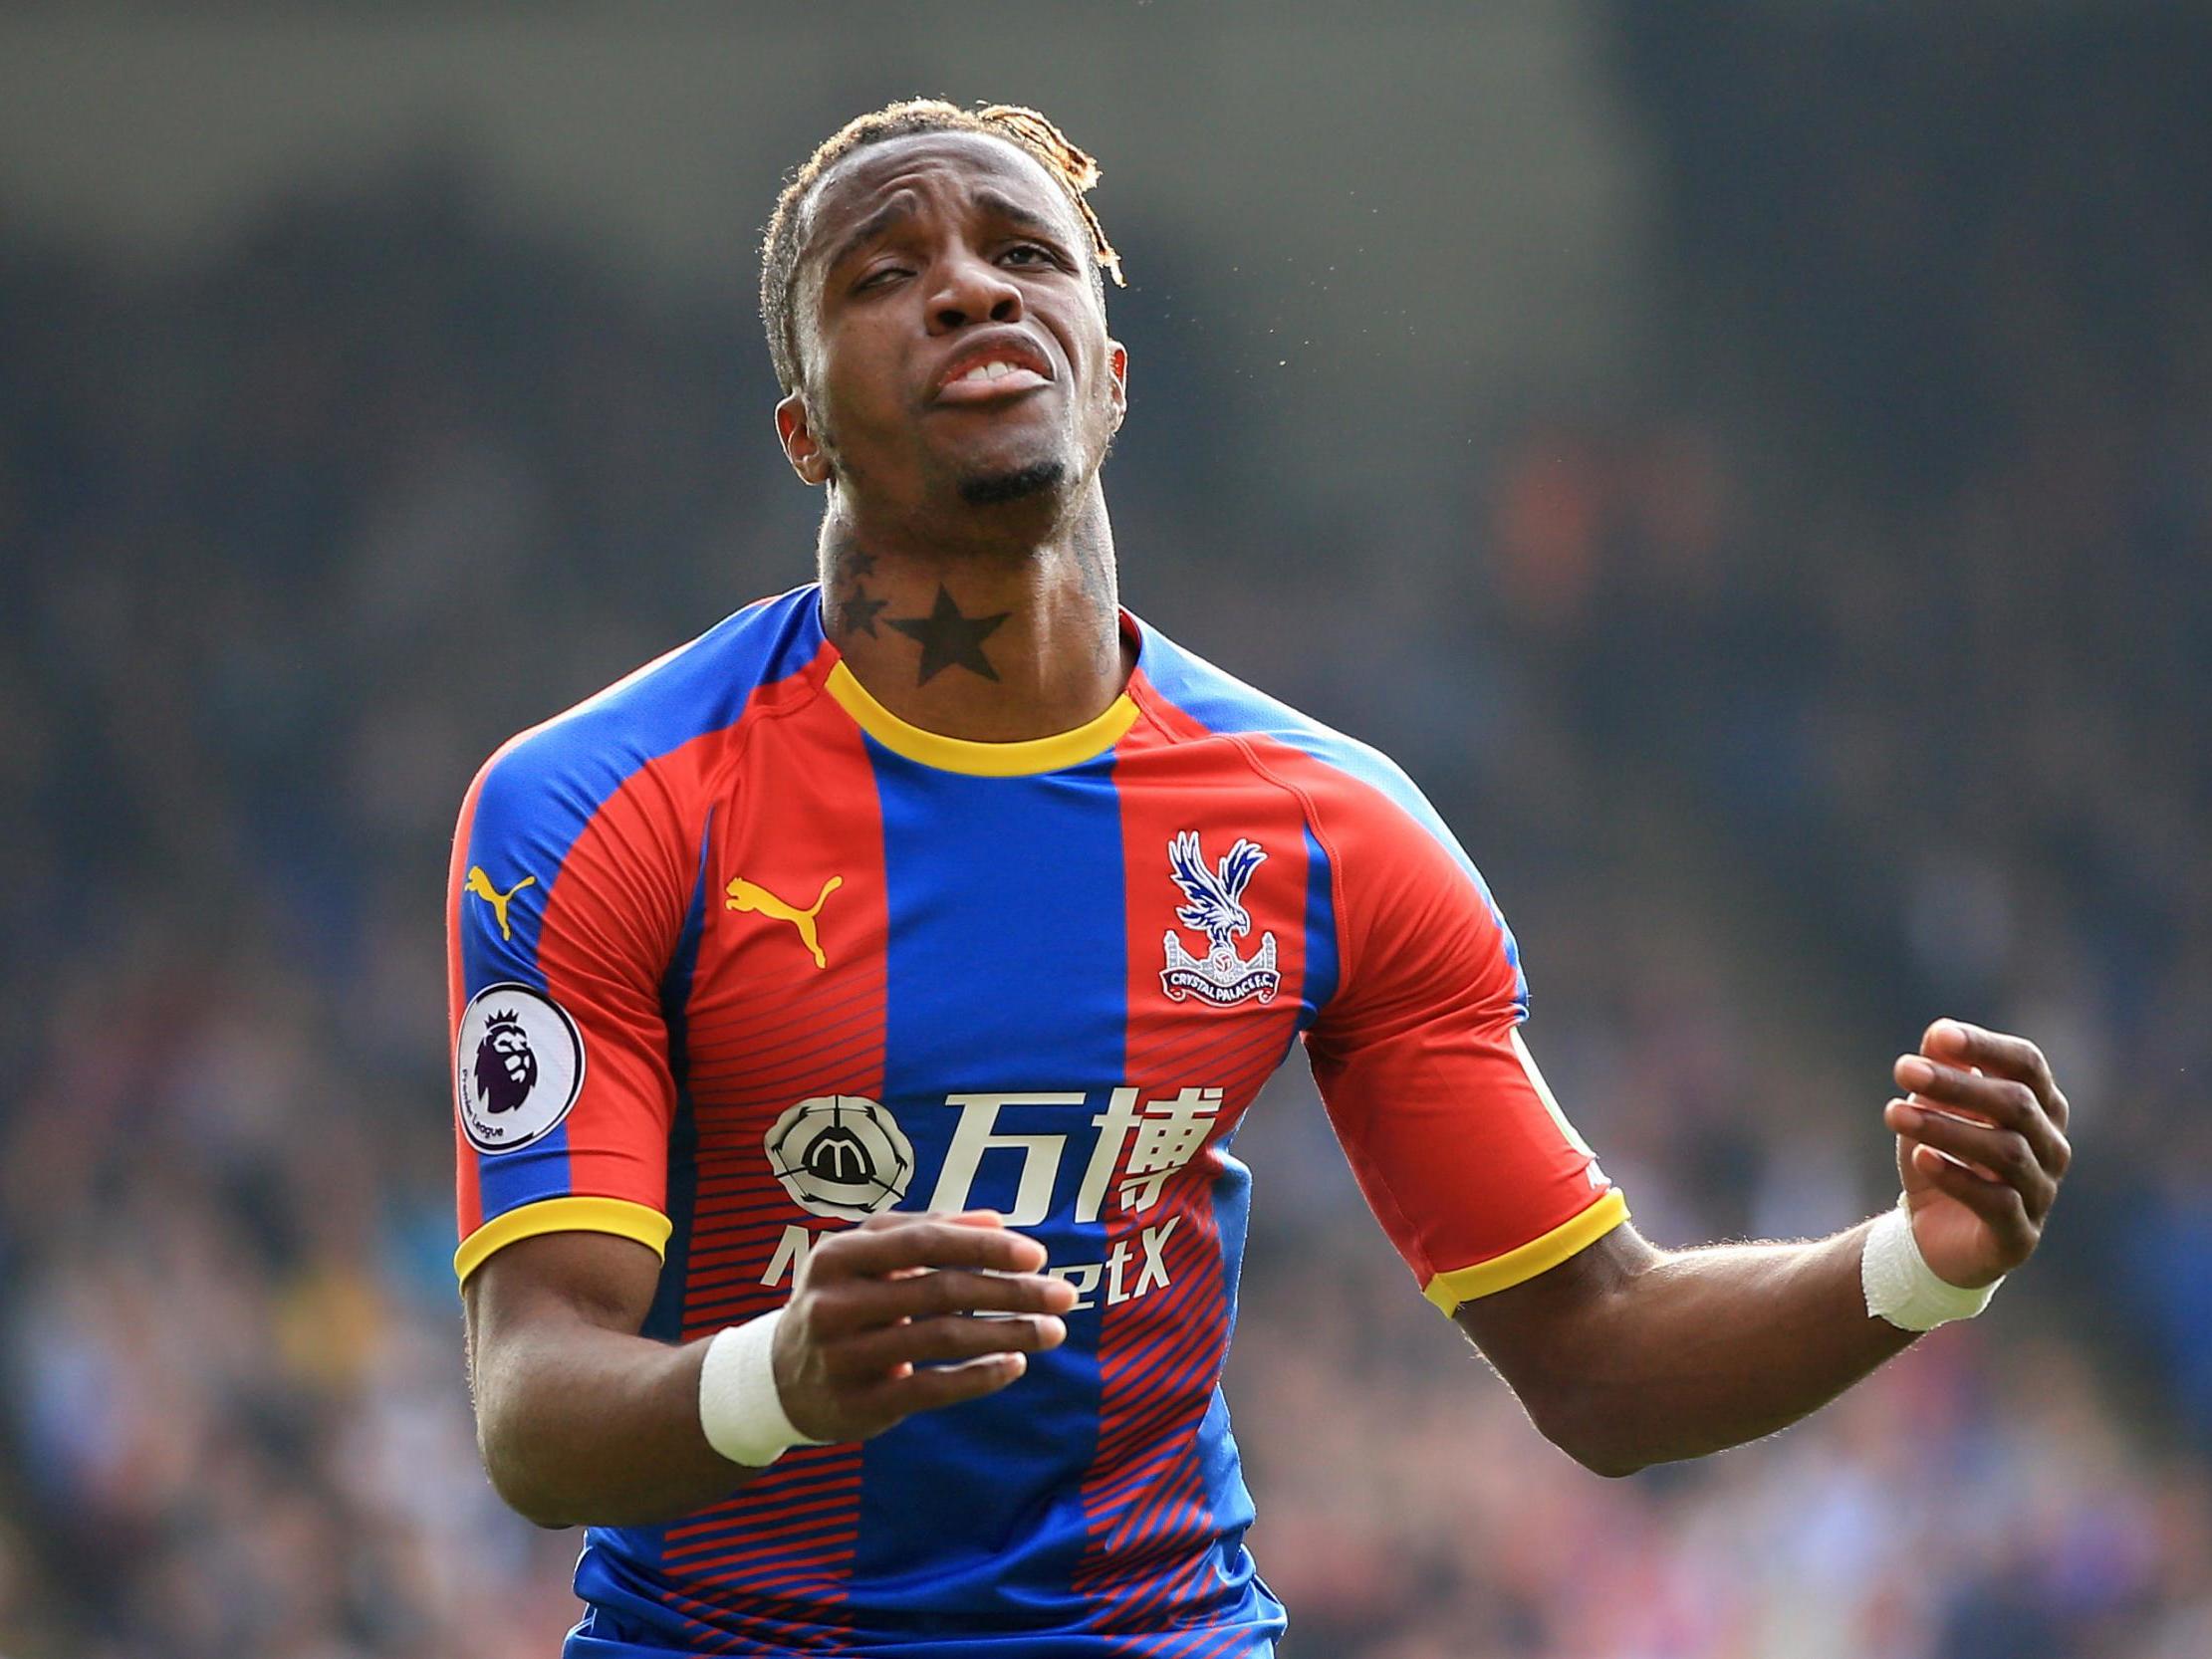 Everton have ended their interest in Zaha (Getty)